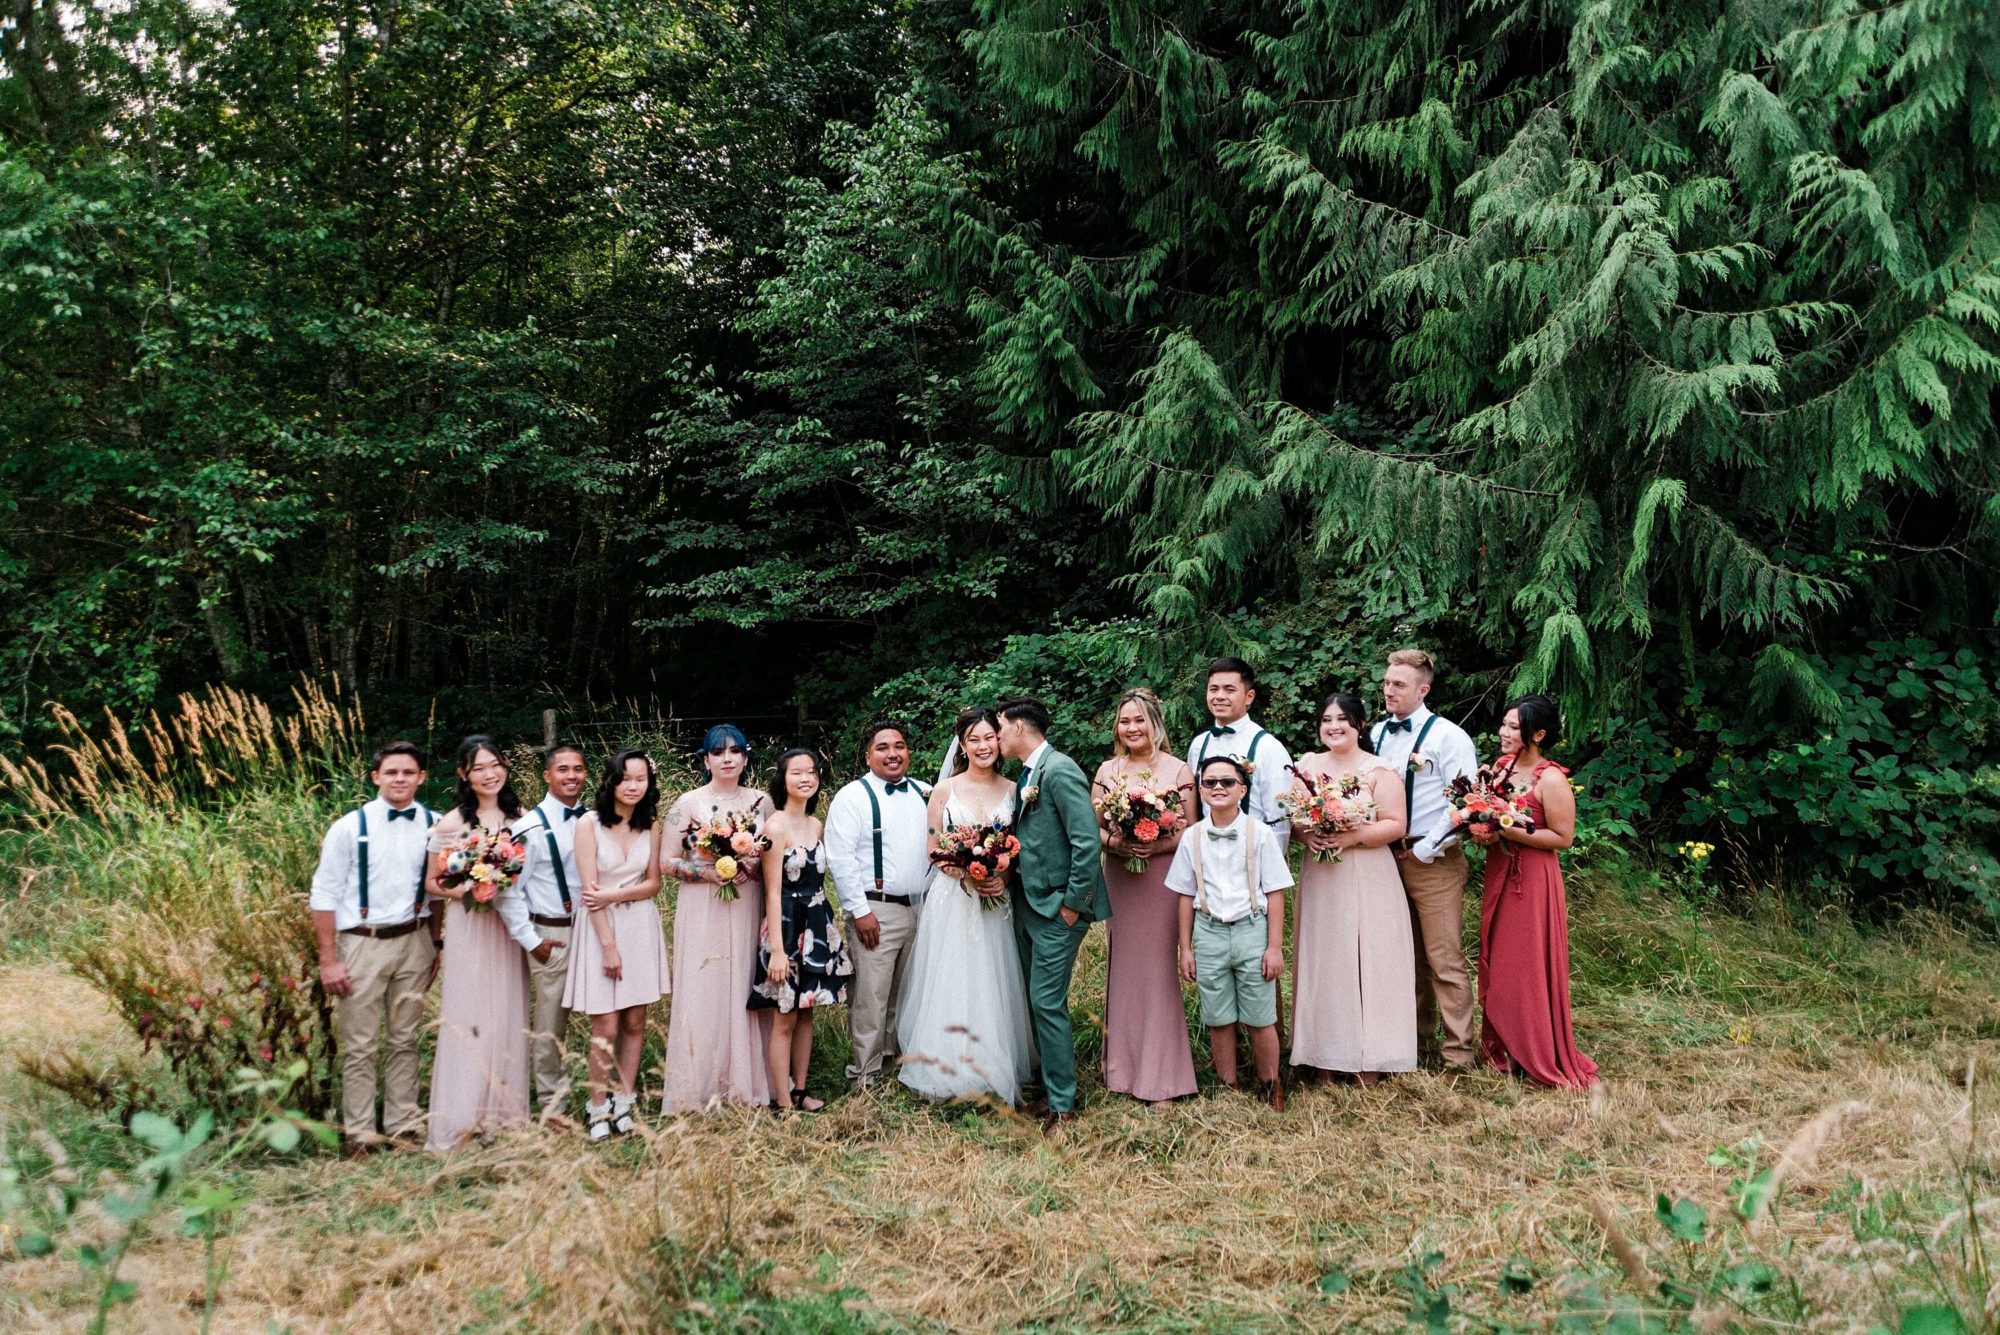 Bride, groom, and bridal party in a meadow at Misty Clover Farm Olympic Peninsula Wedding Venue